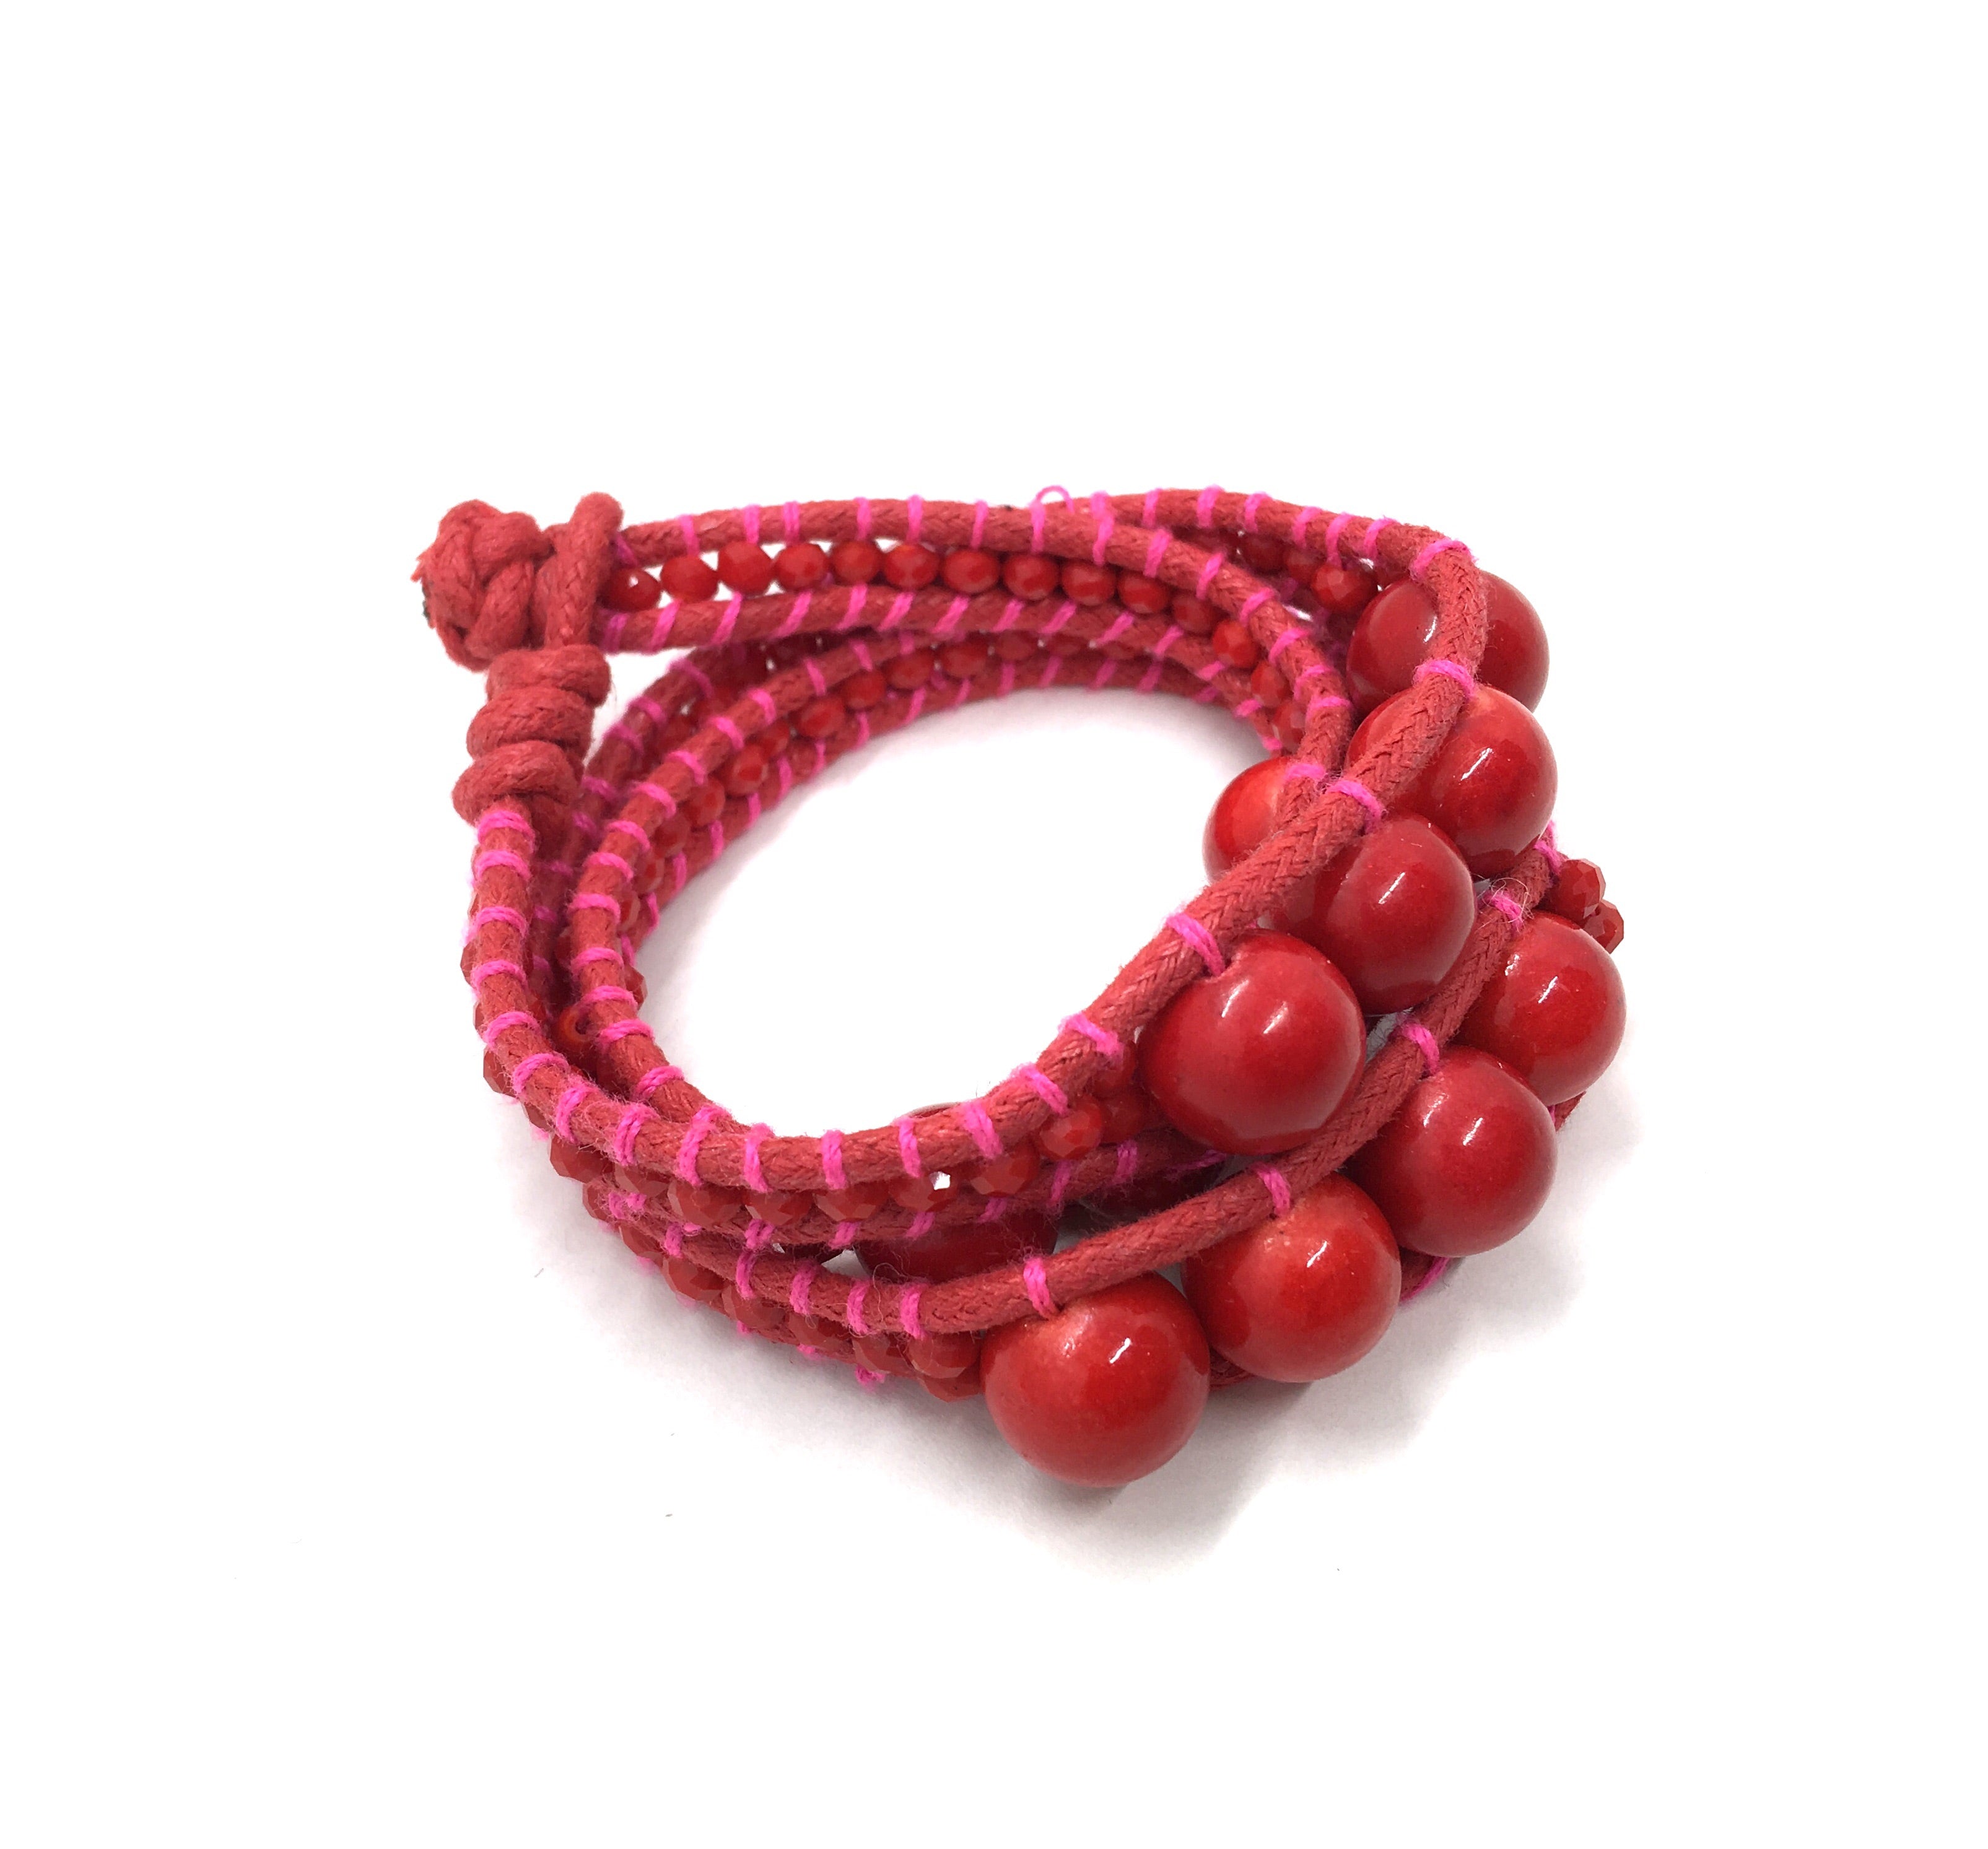 I love Syria - Triple Wrap around - big red stone - red cord - pink thread